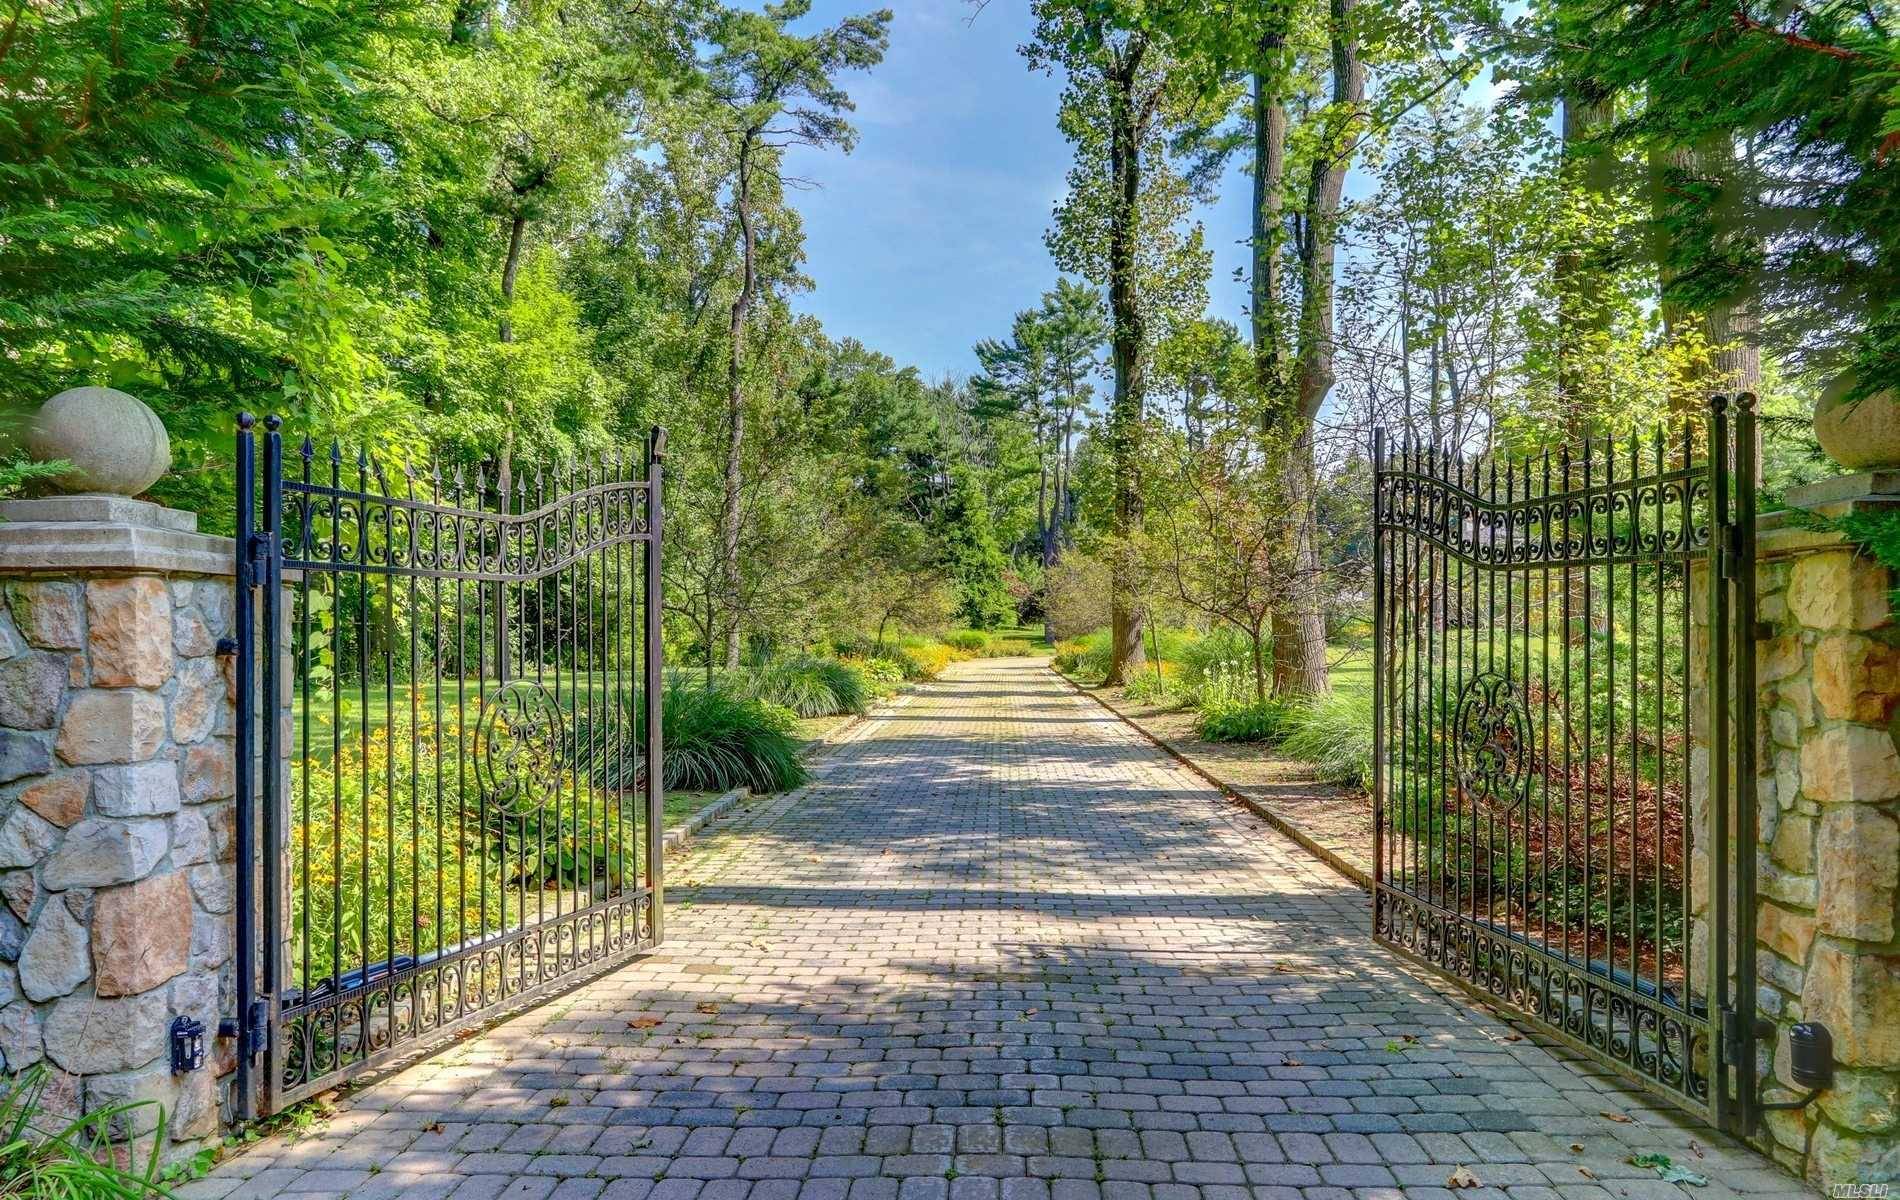 Set Behind Gated Entry on 4 quiet acres w IG Pool, this Magnificent 9yr old Estate Offers Unparalleled Luxury, Spacious Formal Rms w Fireplaces, w Fabulous Chef's Kitchen opens to ...